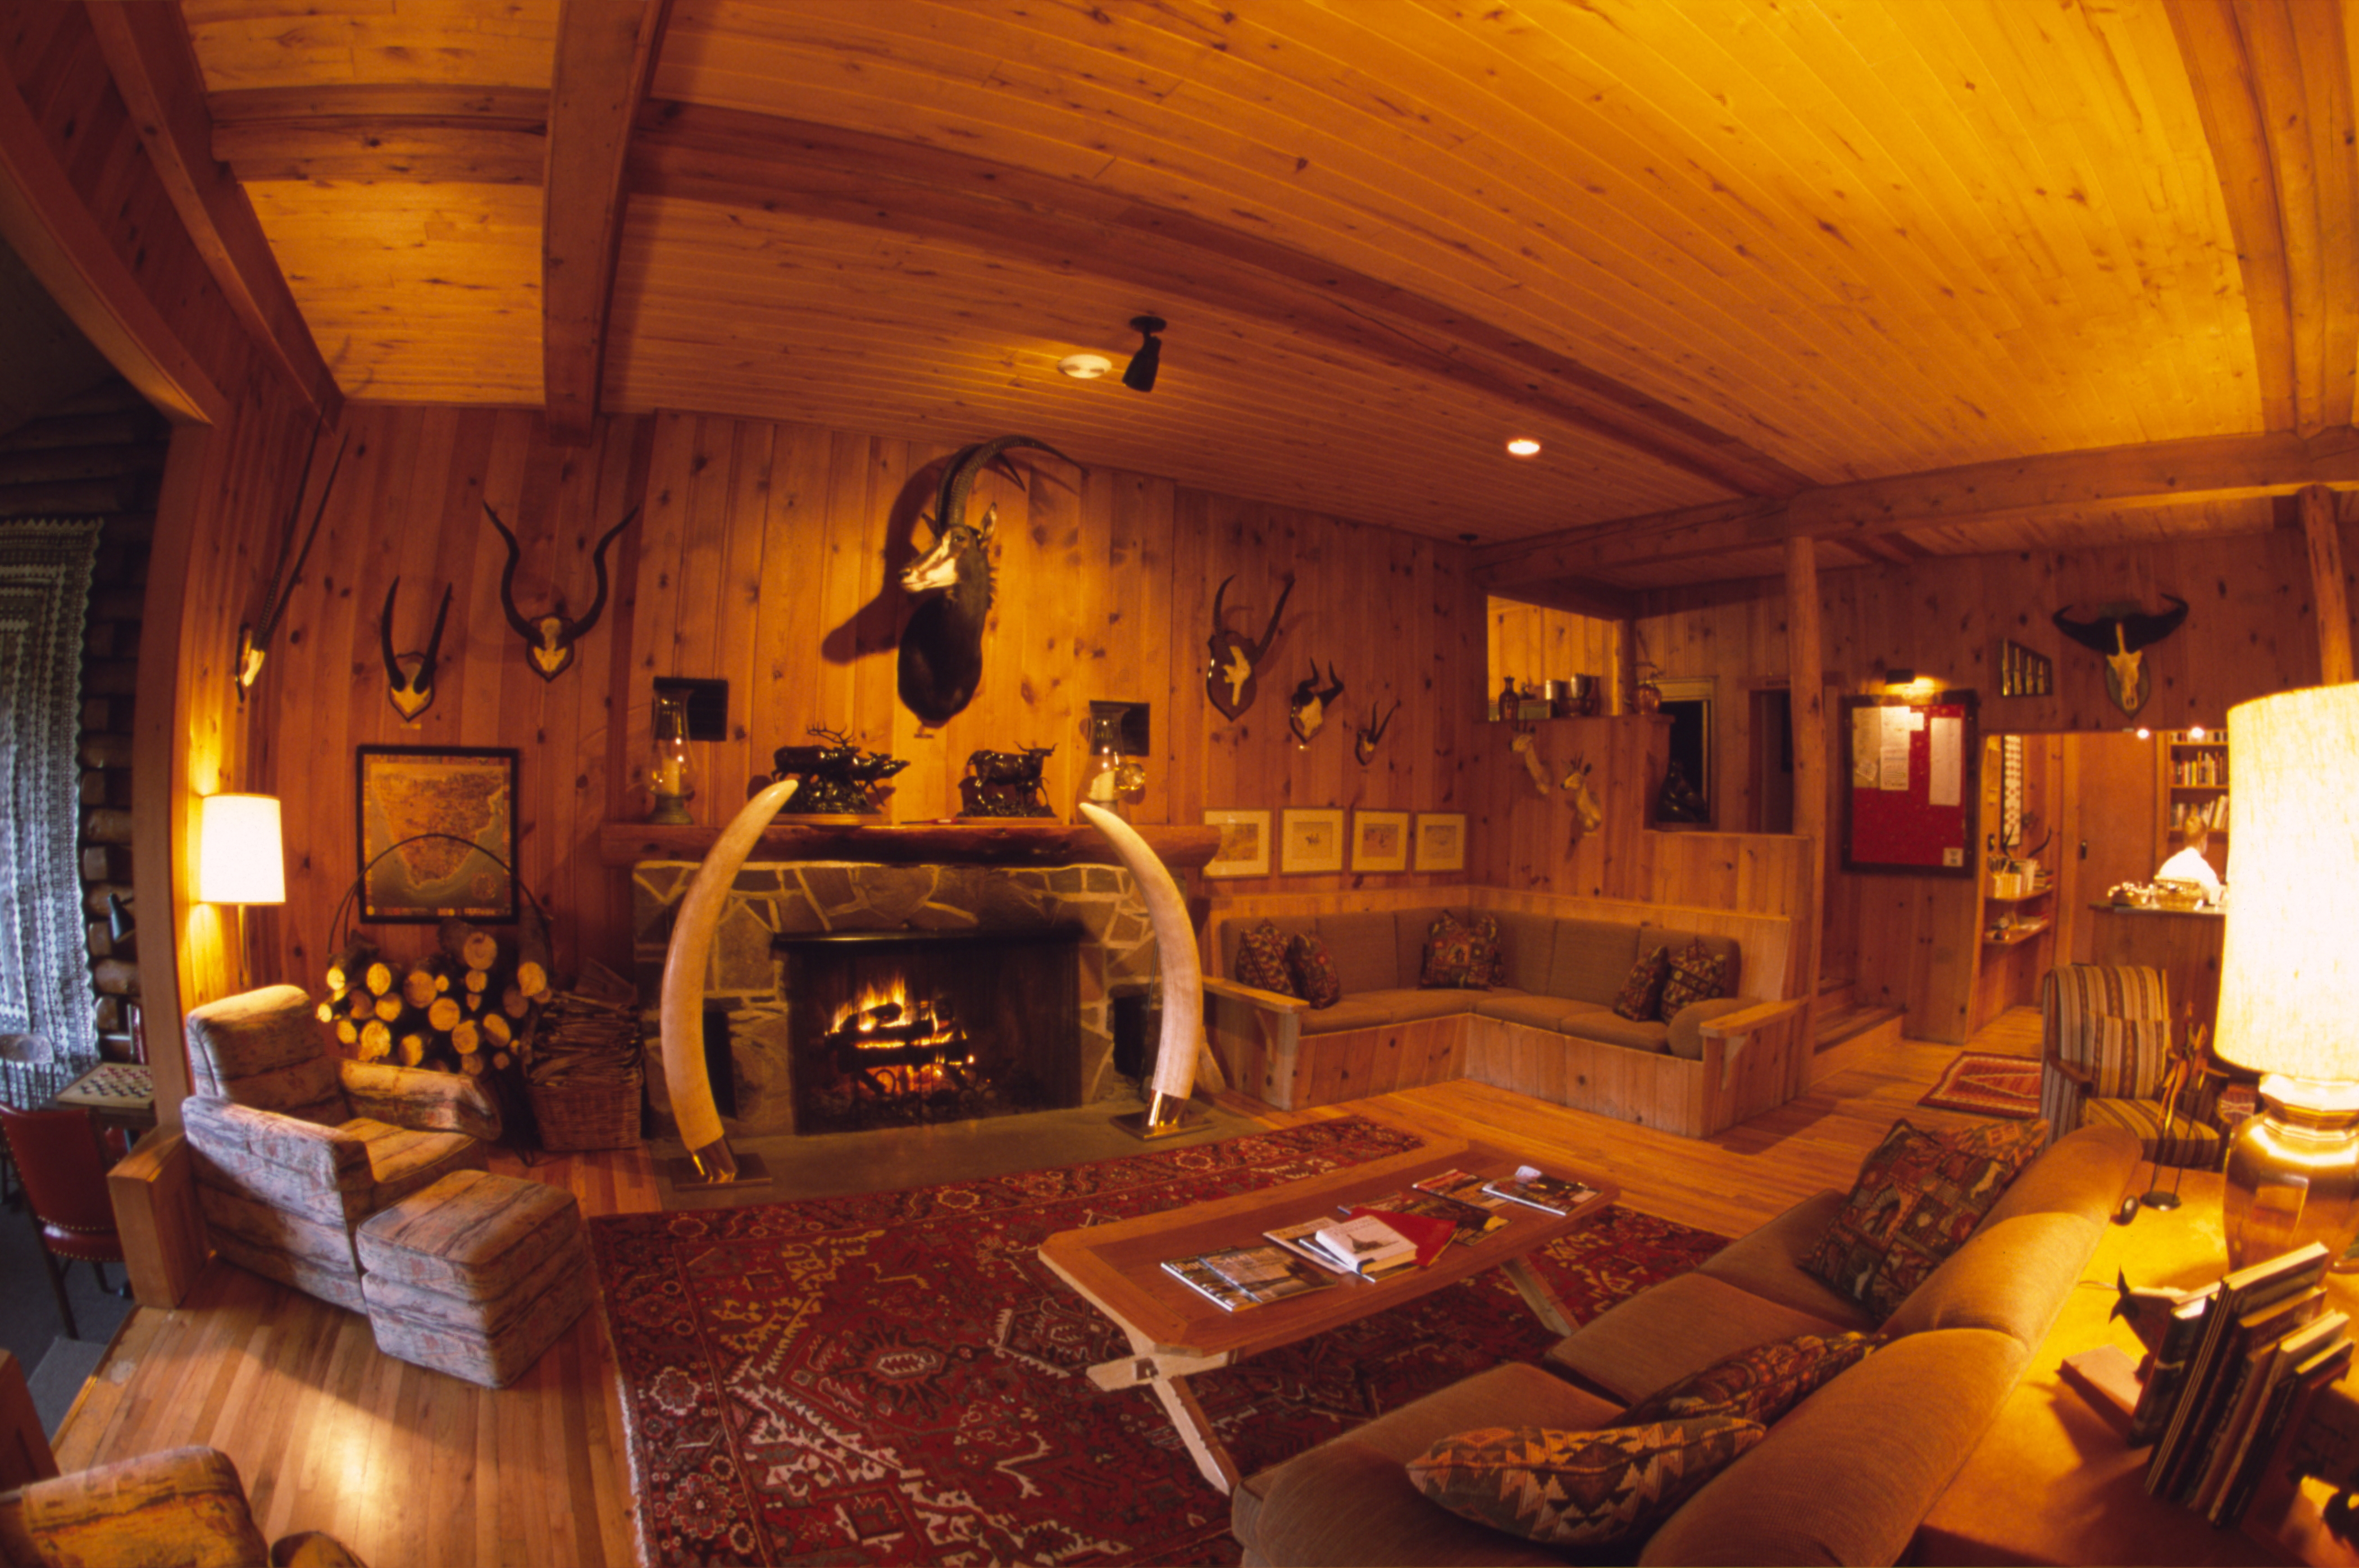 We look forward to filling our Colorado guest lodge with people